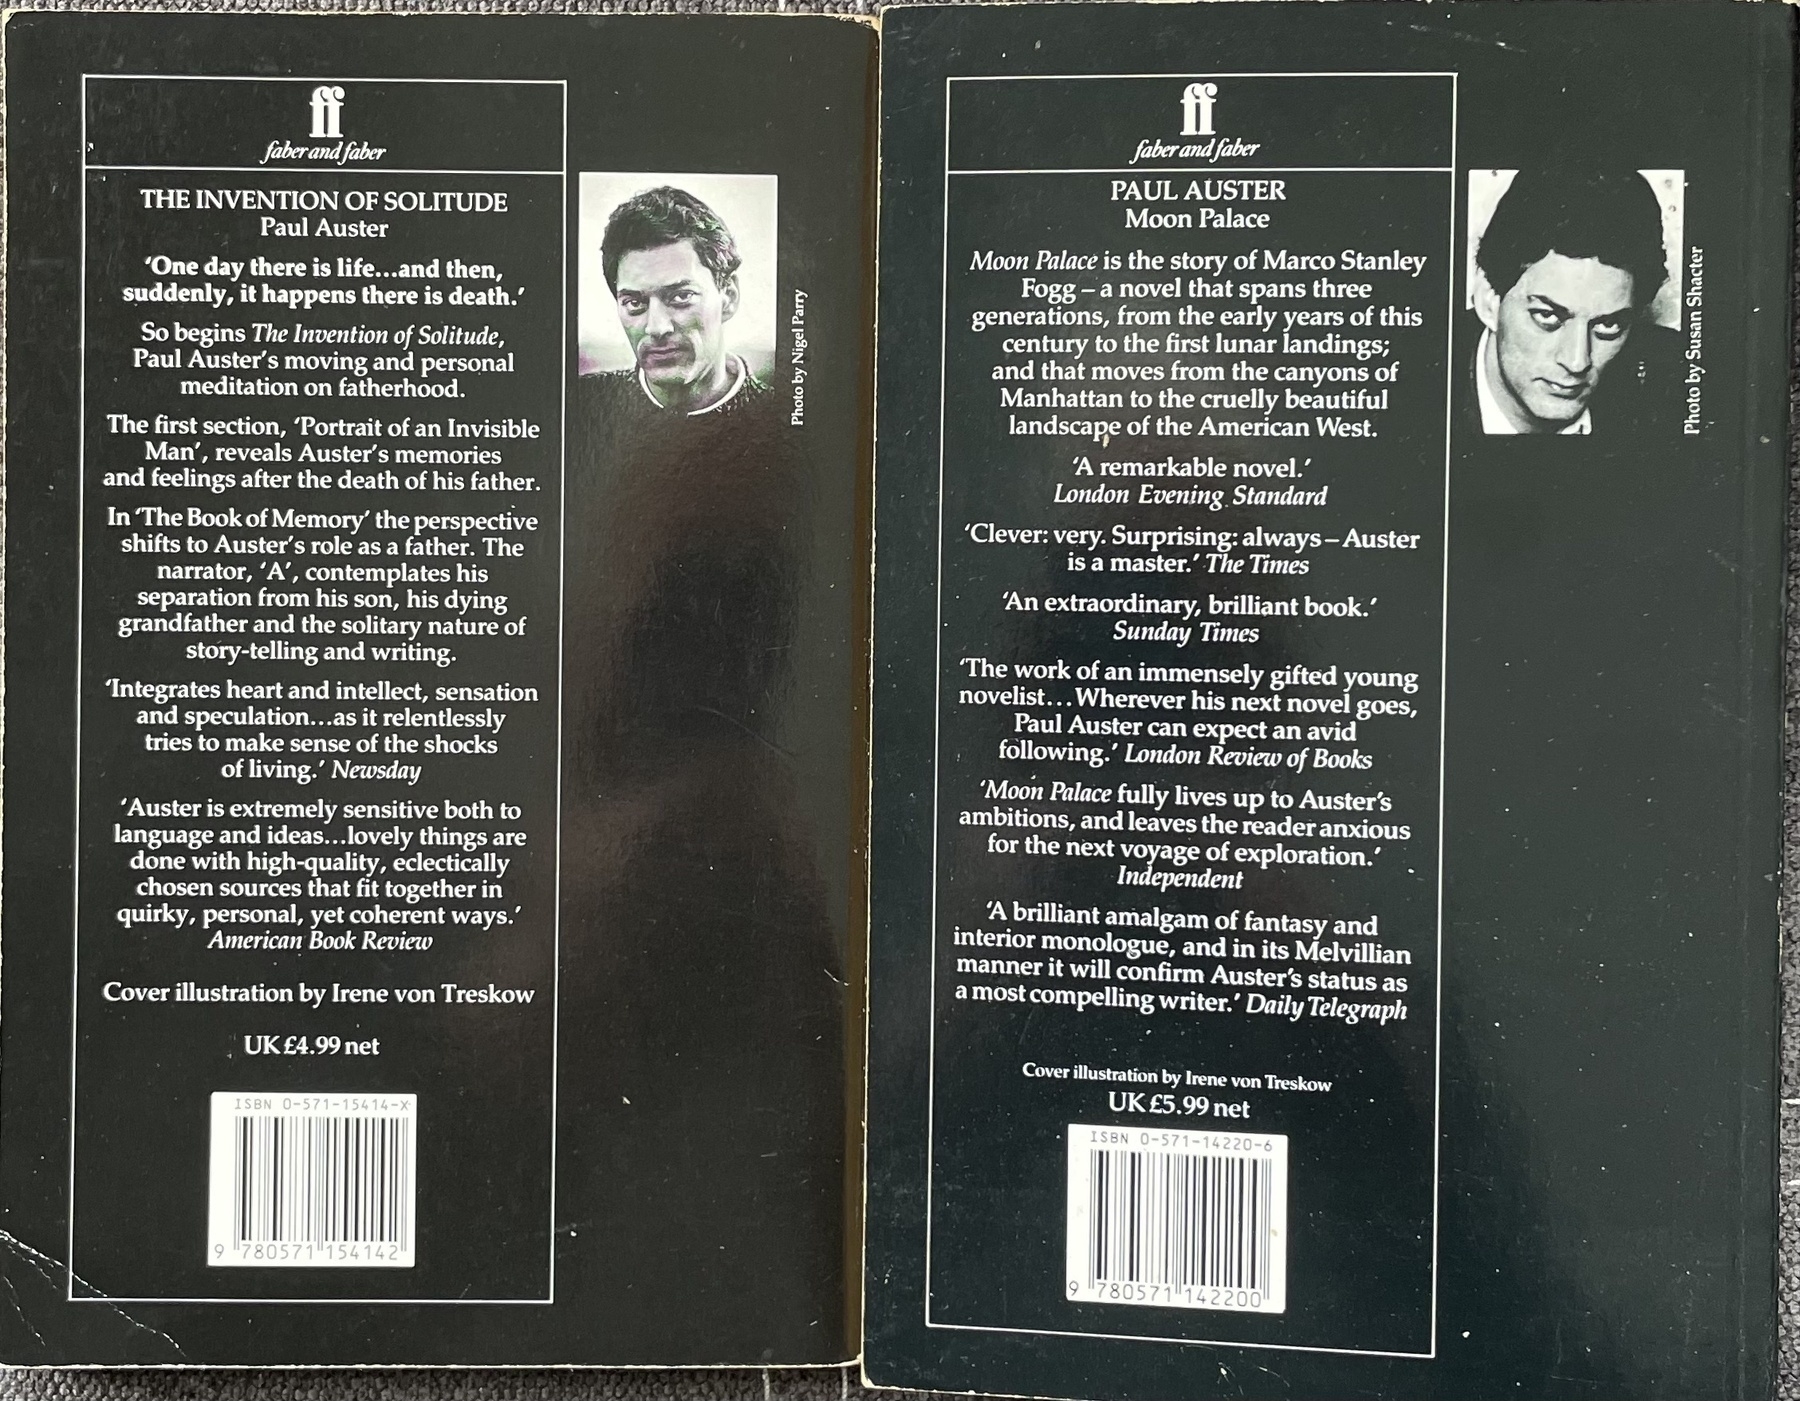 Back covers of two Faber paperbacks of books by Paul Auster, The Invention of Solitude and Moon Palace. The description of the latter reads: Moon Palace is the story of Marco Stanley Fogg — a novel that spans three generations, from the early years of this [the twentieth] century to the first lunar landings; and that moves from the canyons of Manhattan to the cruelly beautiful landscape of the American West.